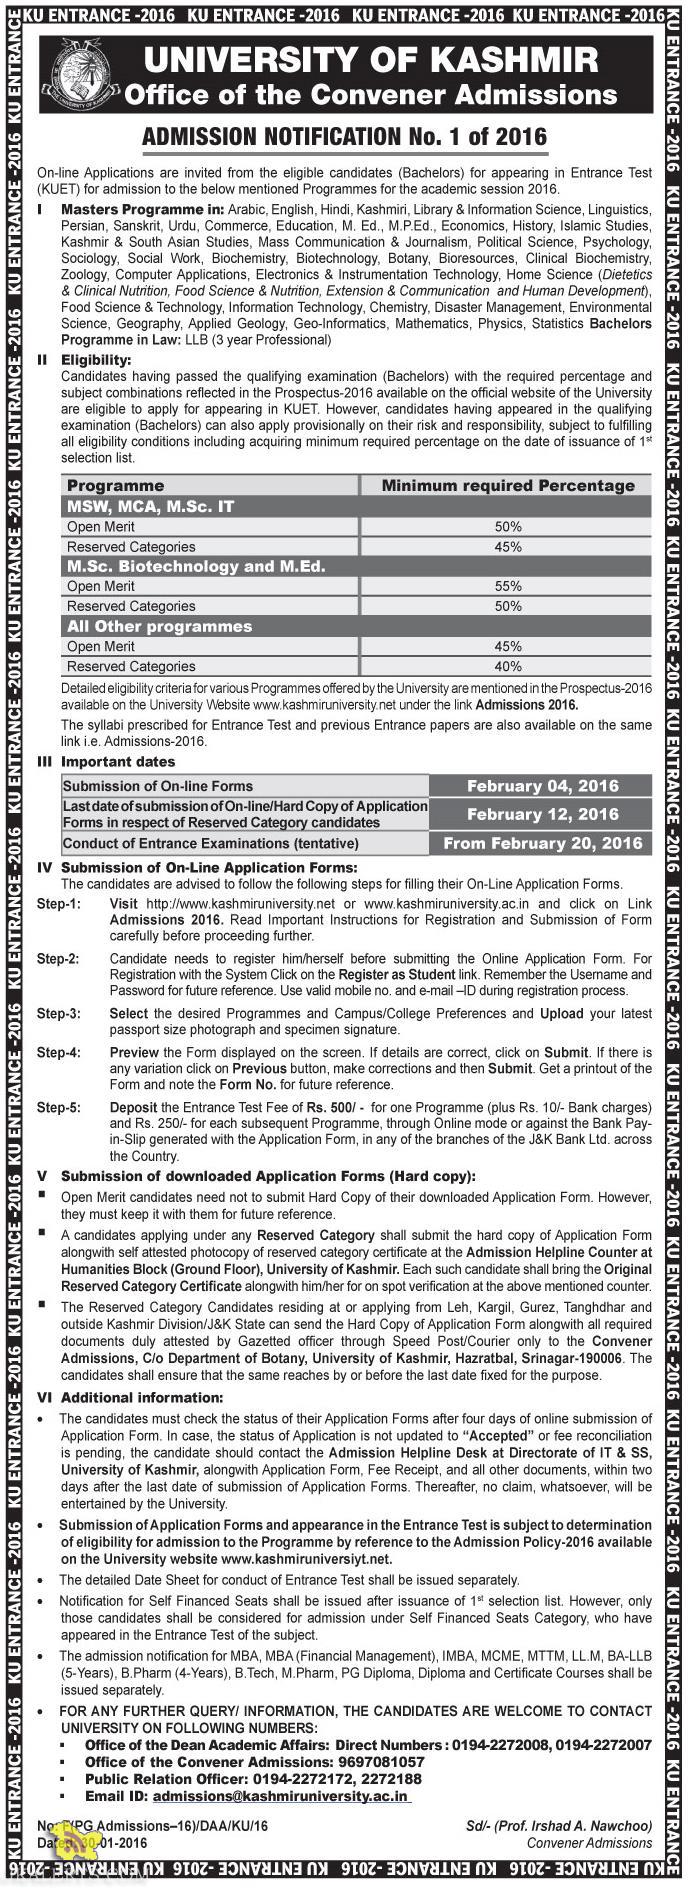 Kashmir university On-line Applications are invited from appearing in Entrance Test